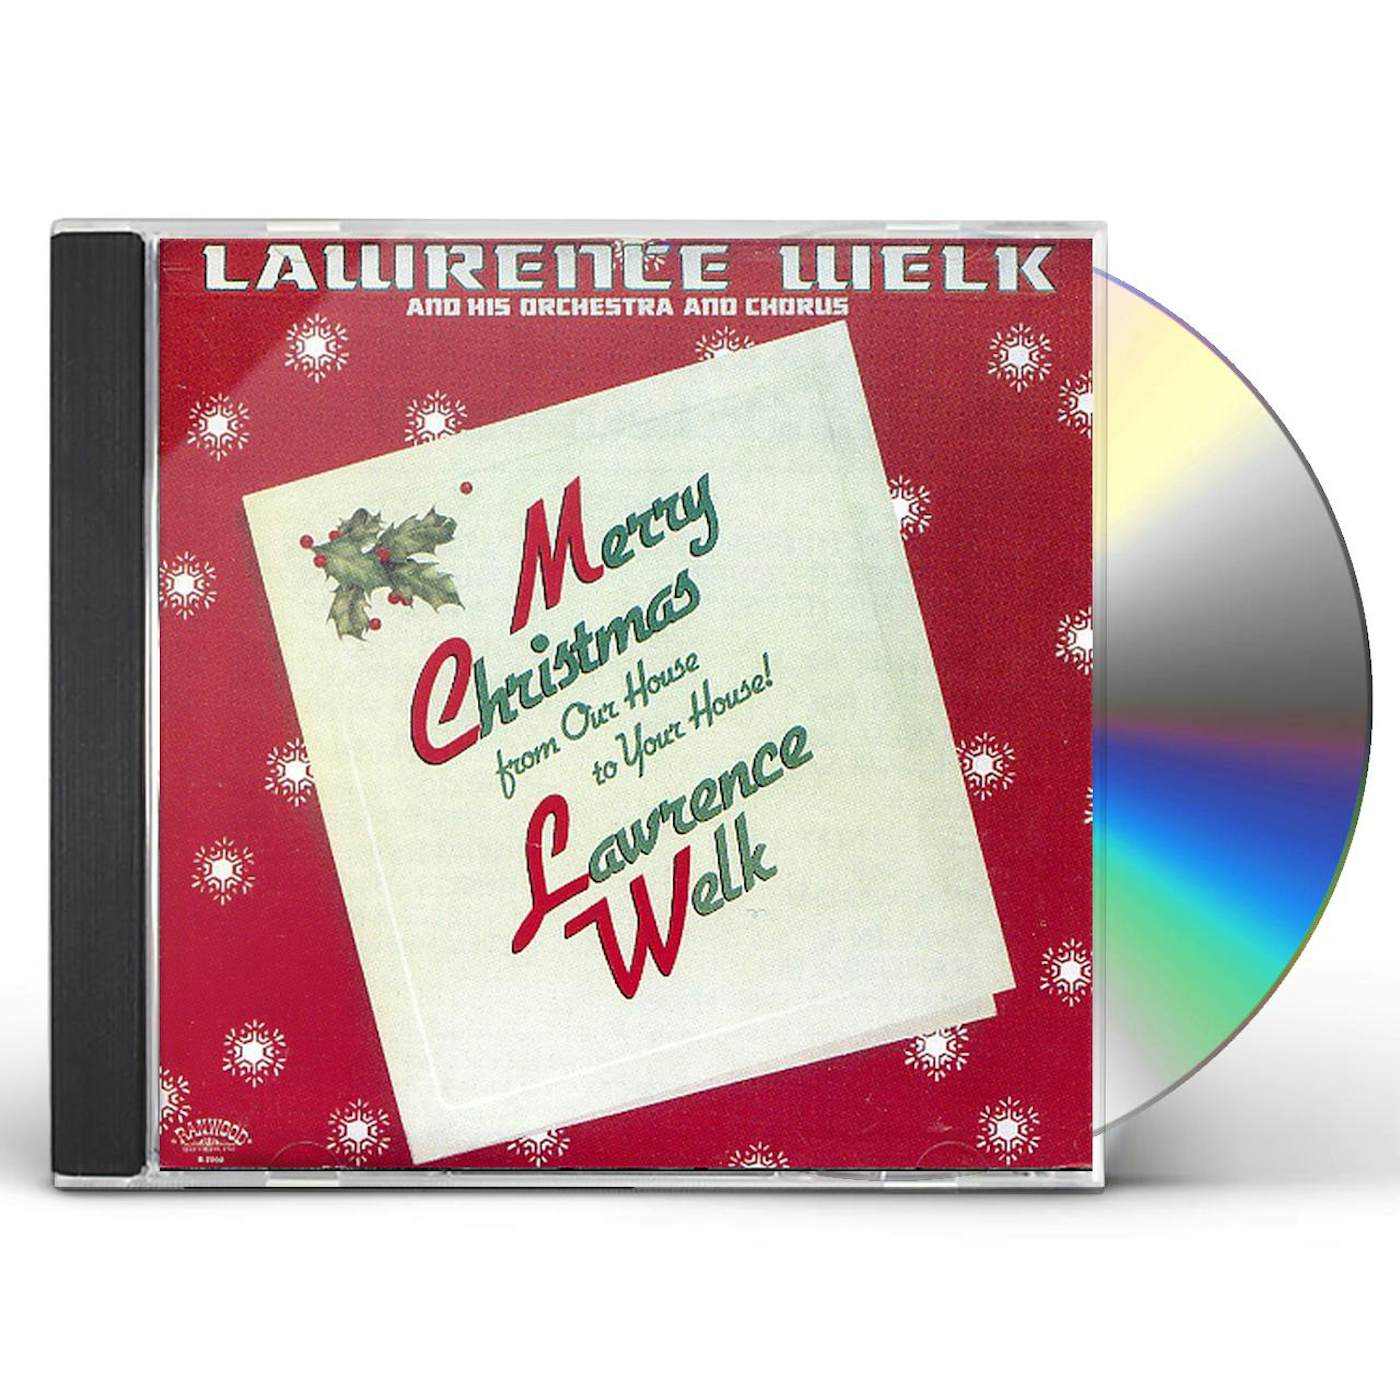 Lawrence Welk MERRY CHRISTMAS FROM OUR HOUSE TO YOUR HOUSE CD